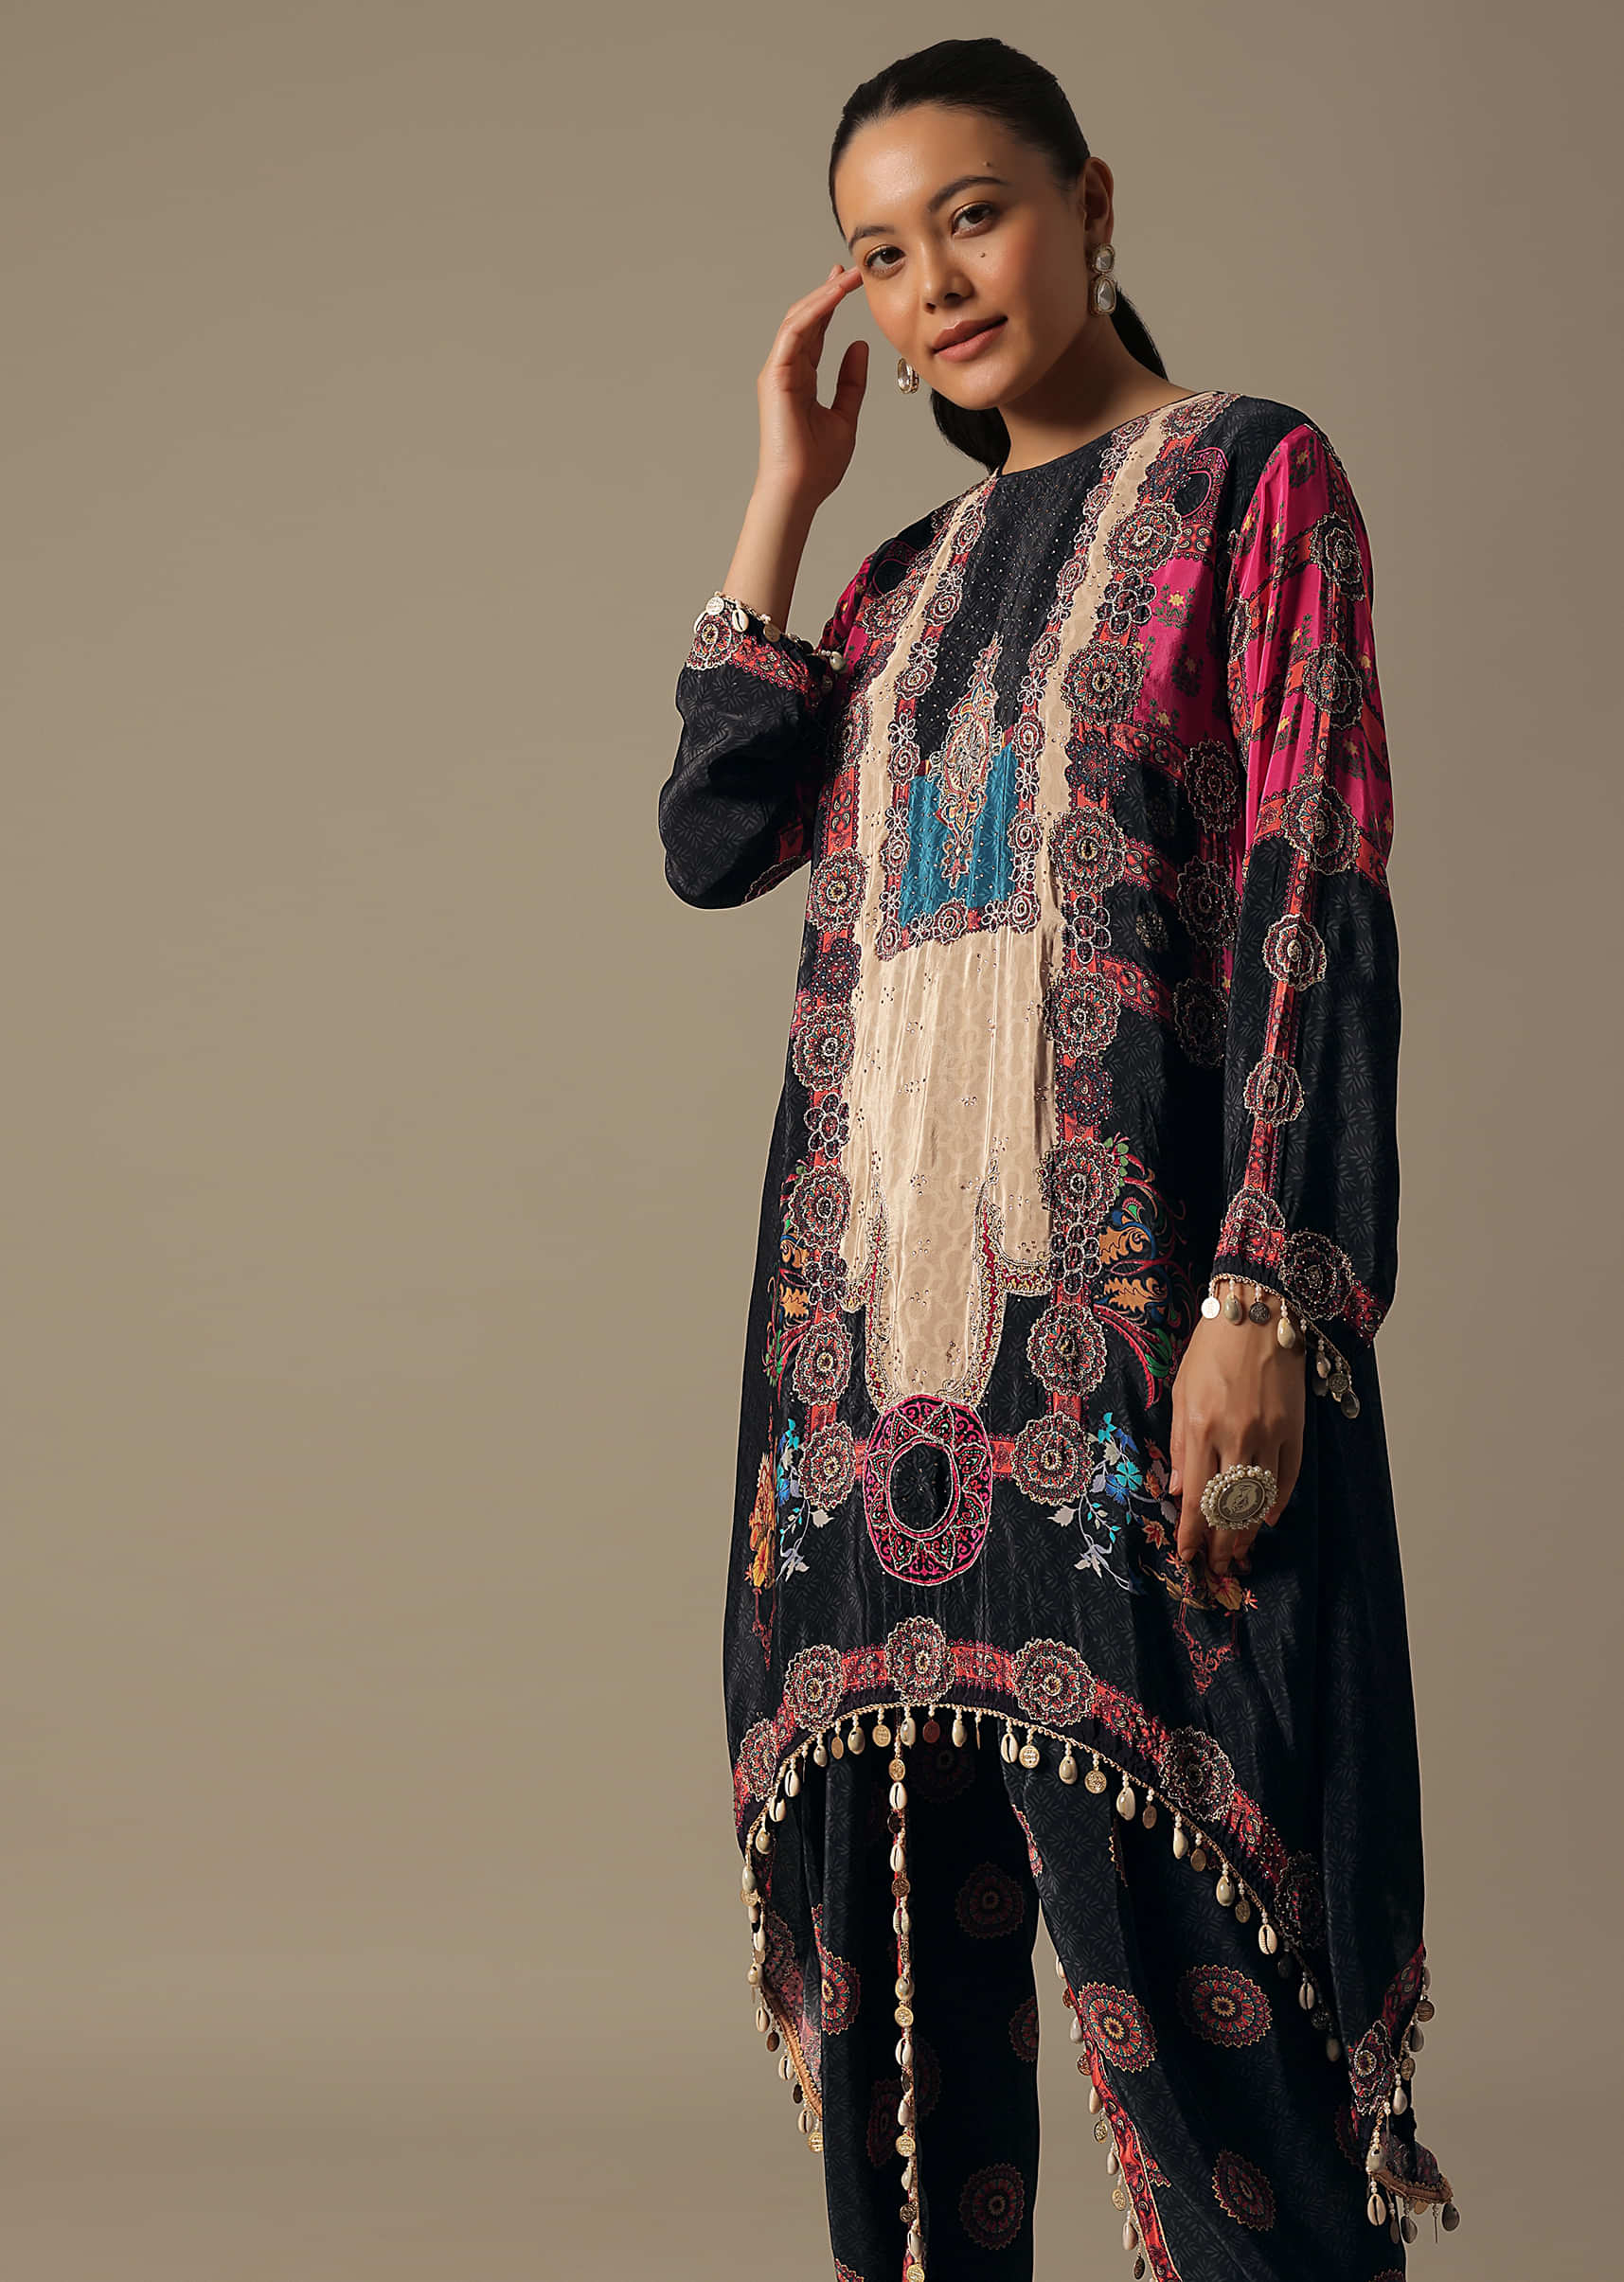 Black Floral Long Dhoti Gown at Rs 6500, Mahaveer Marg